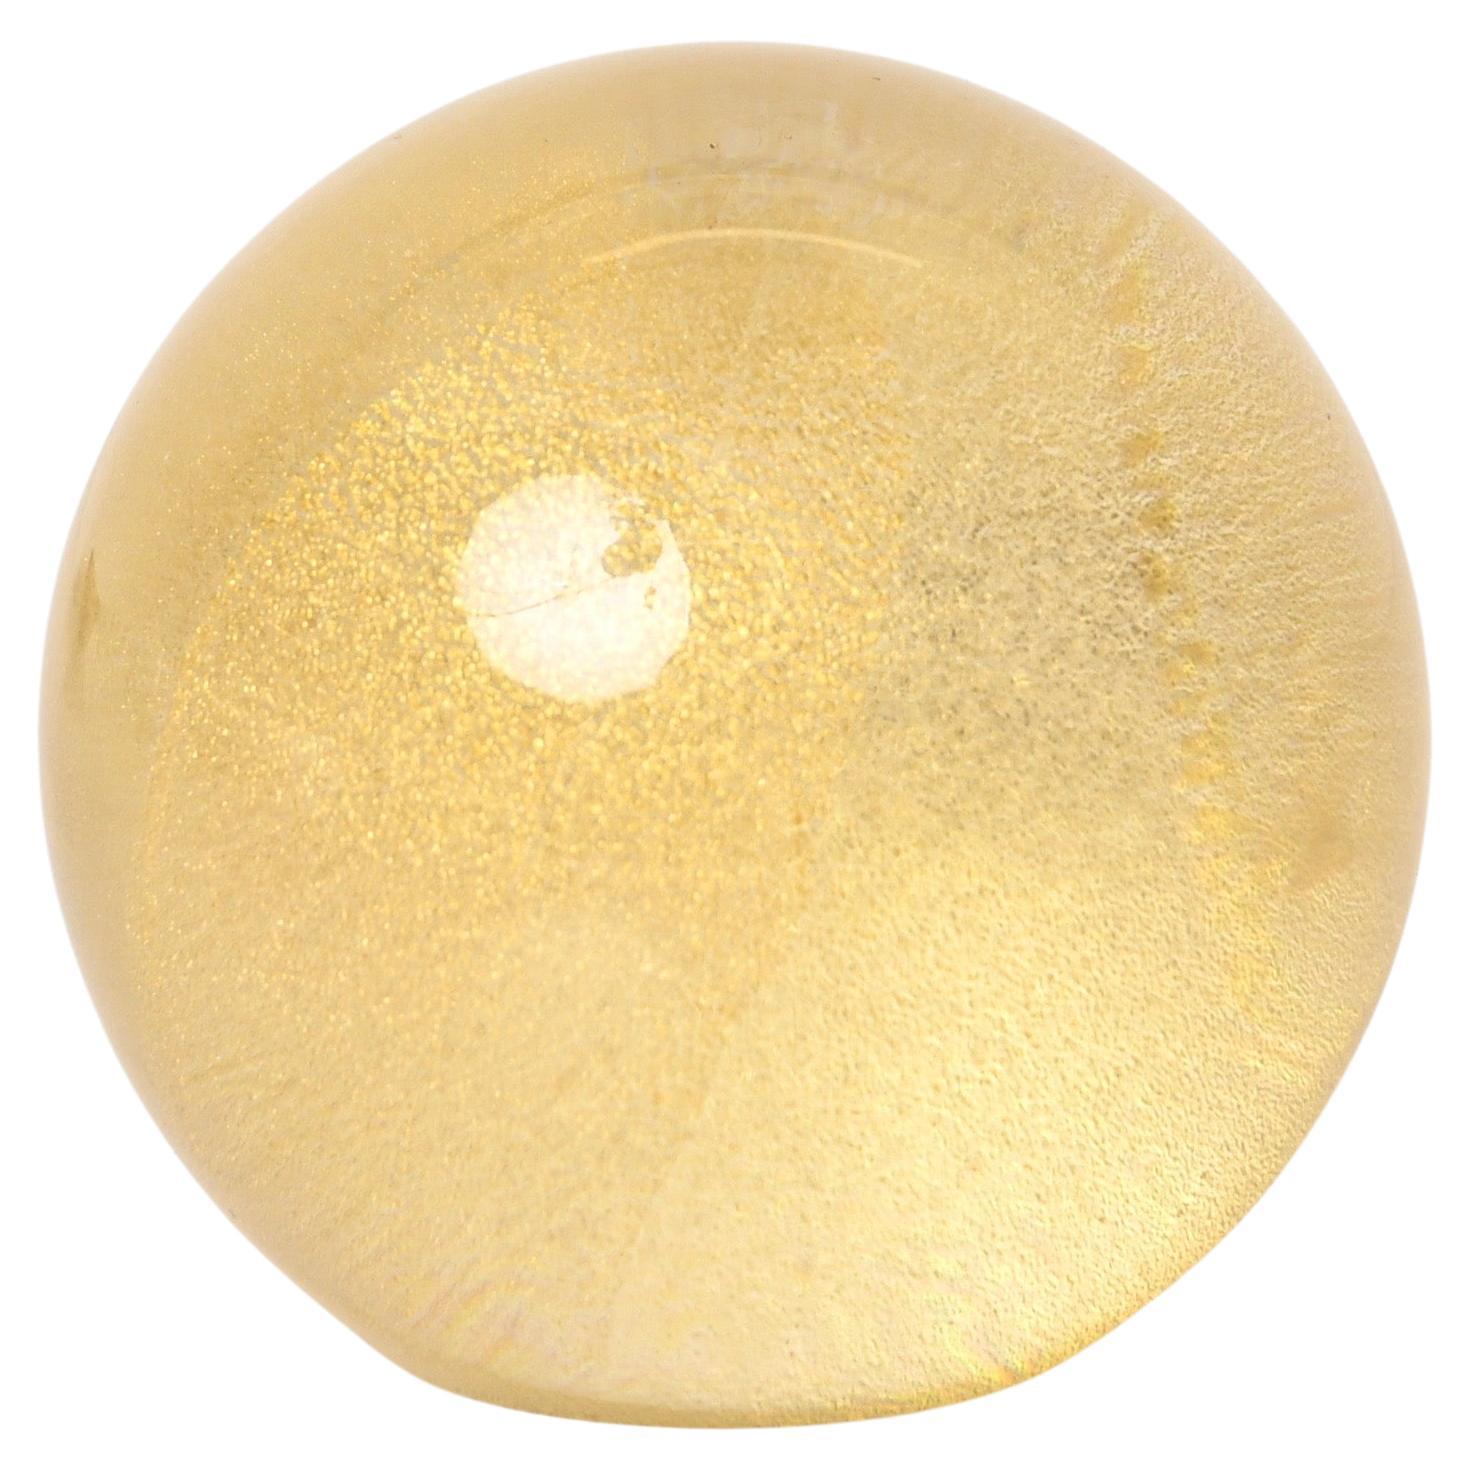 Seguso Spherical Paperweight in Murano Glass with Gold Dust, Italy 1950s For Sale